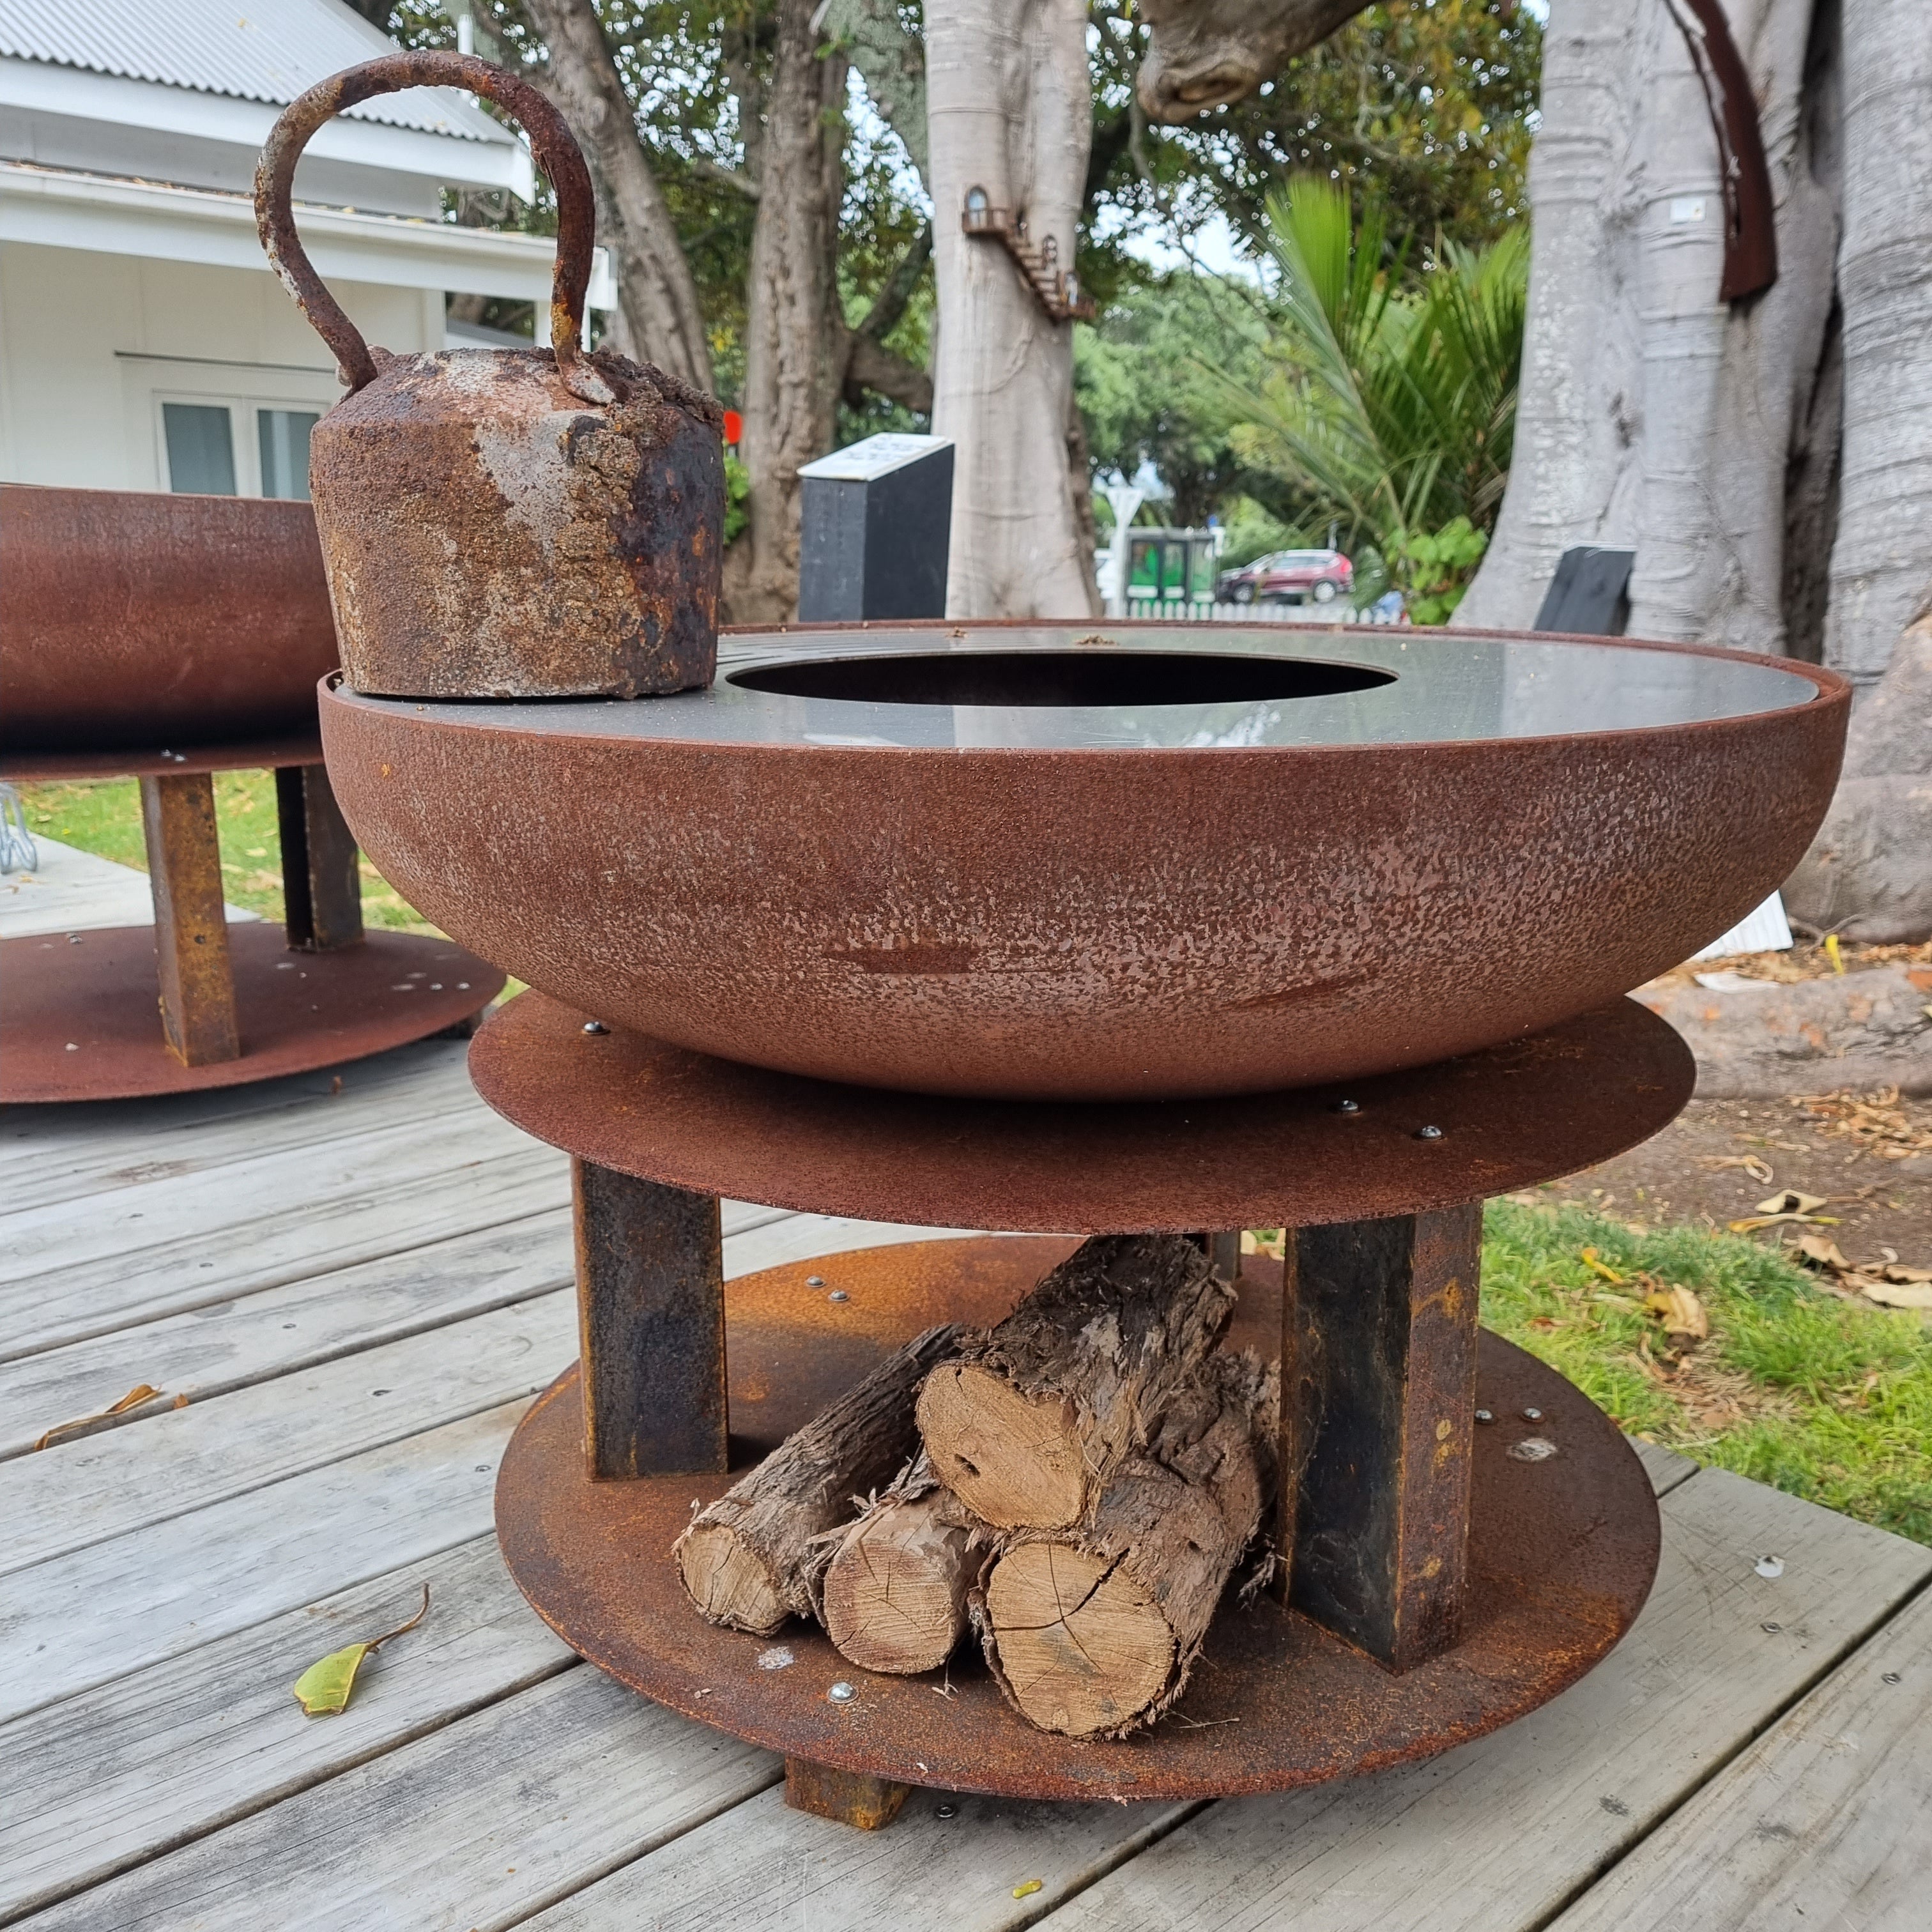 The Awhitu 900 Fire Bowl with Cooktop and Wood Storage